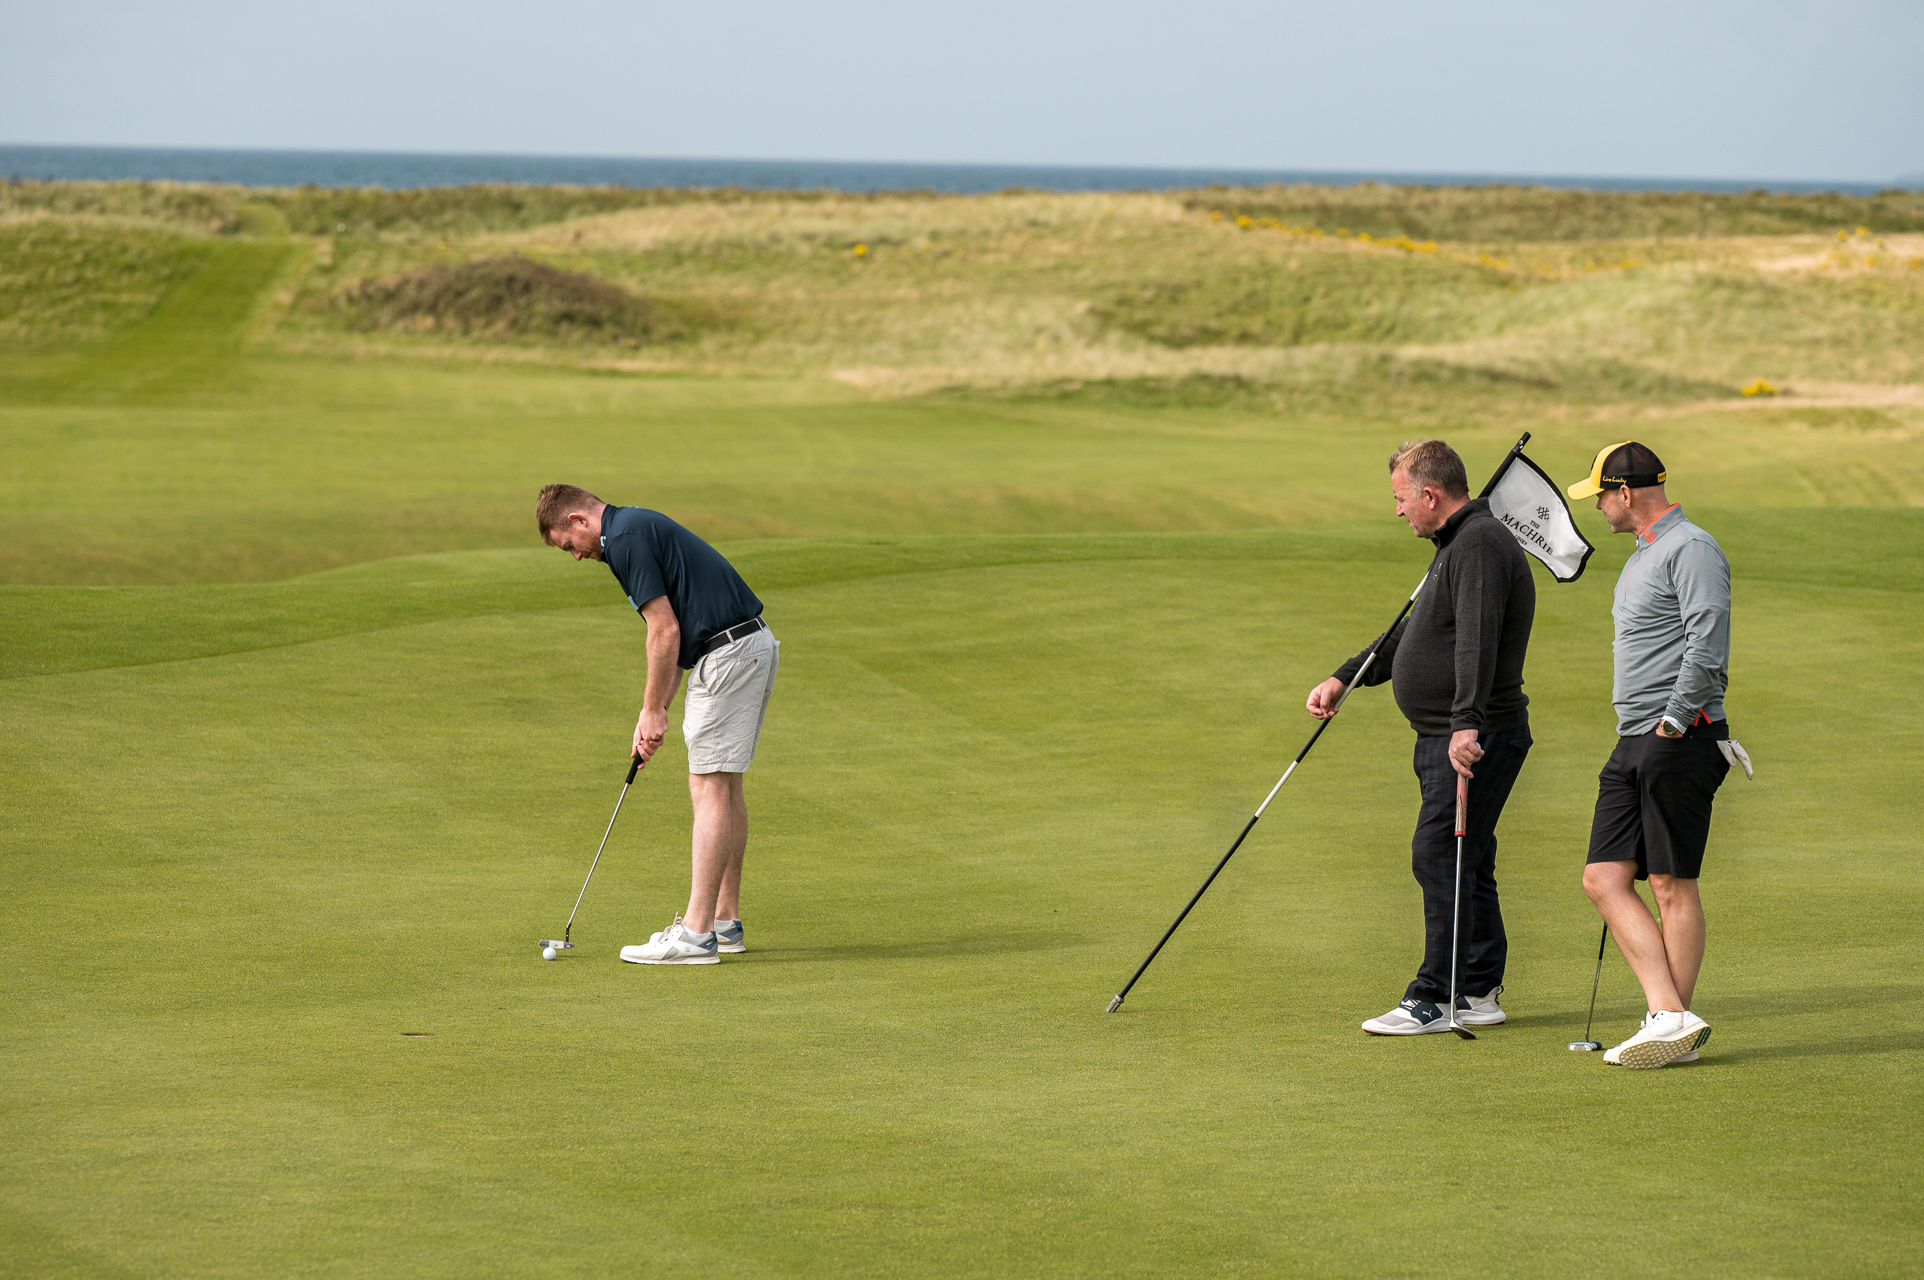 Action shot on the green at Machrie Golf Links